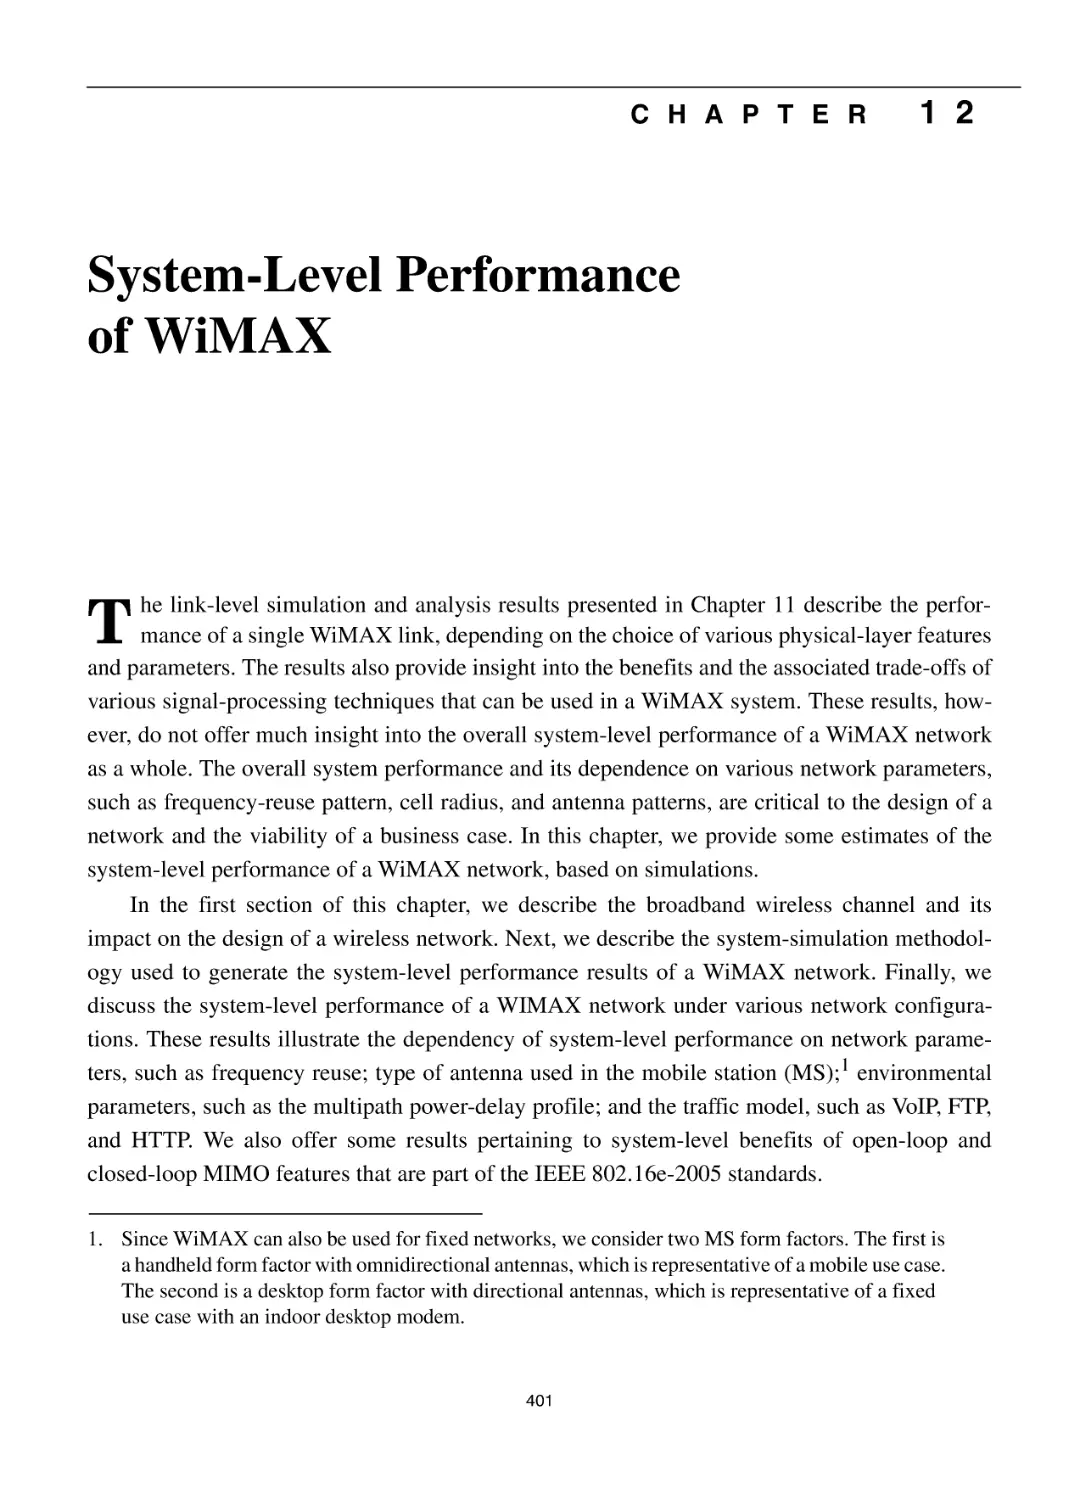 12 System-Level Performance of WiMAX